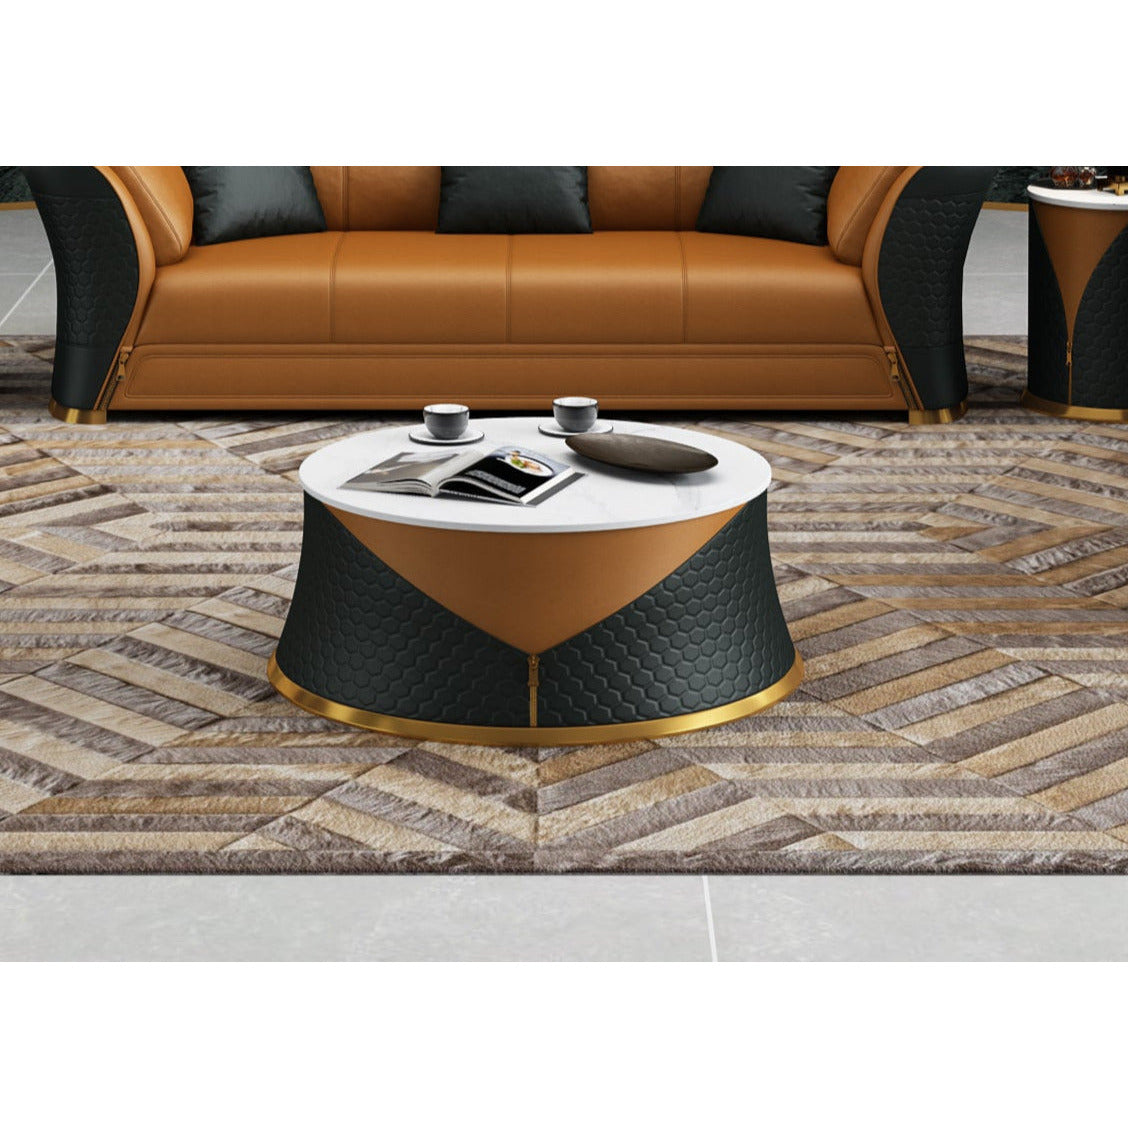 European Furniture - Vogue Coffee Table Cognac & Charcoal - EF-27994-CT - New Star Living